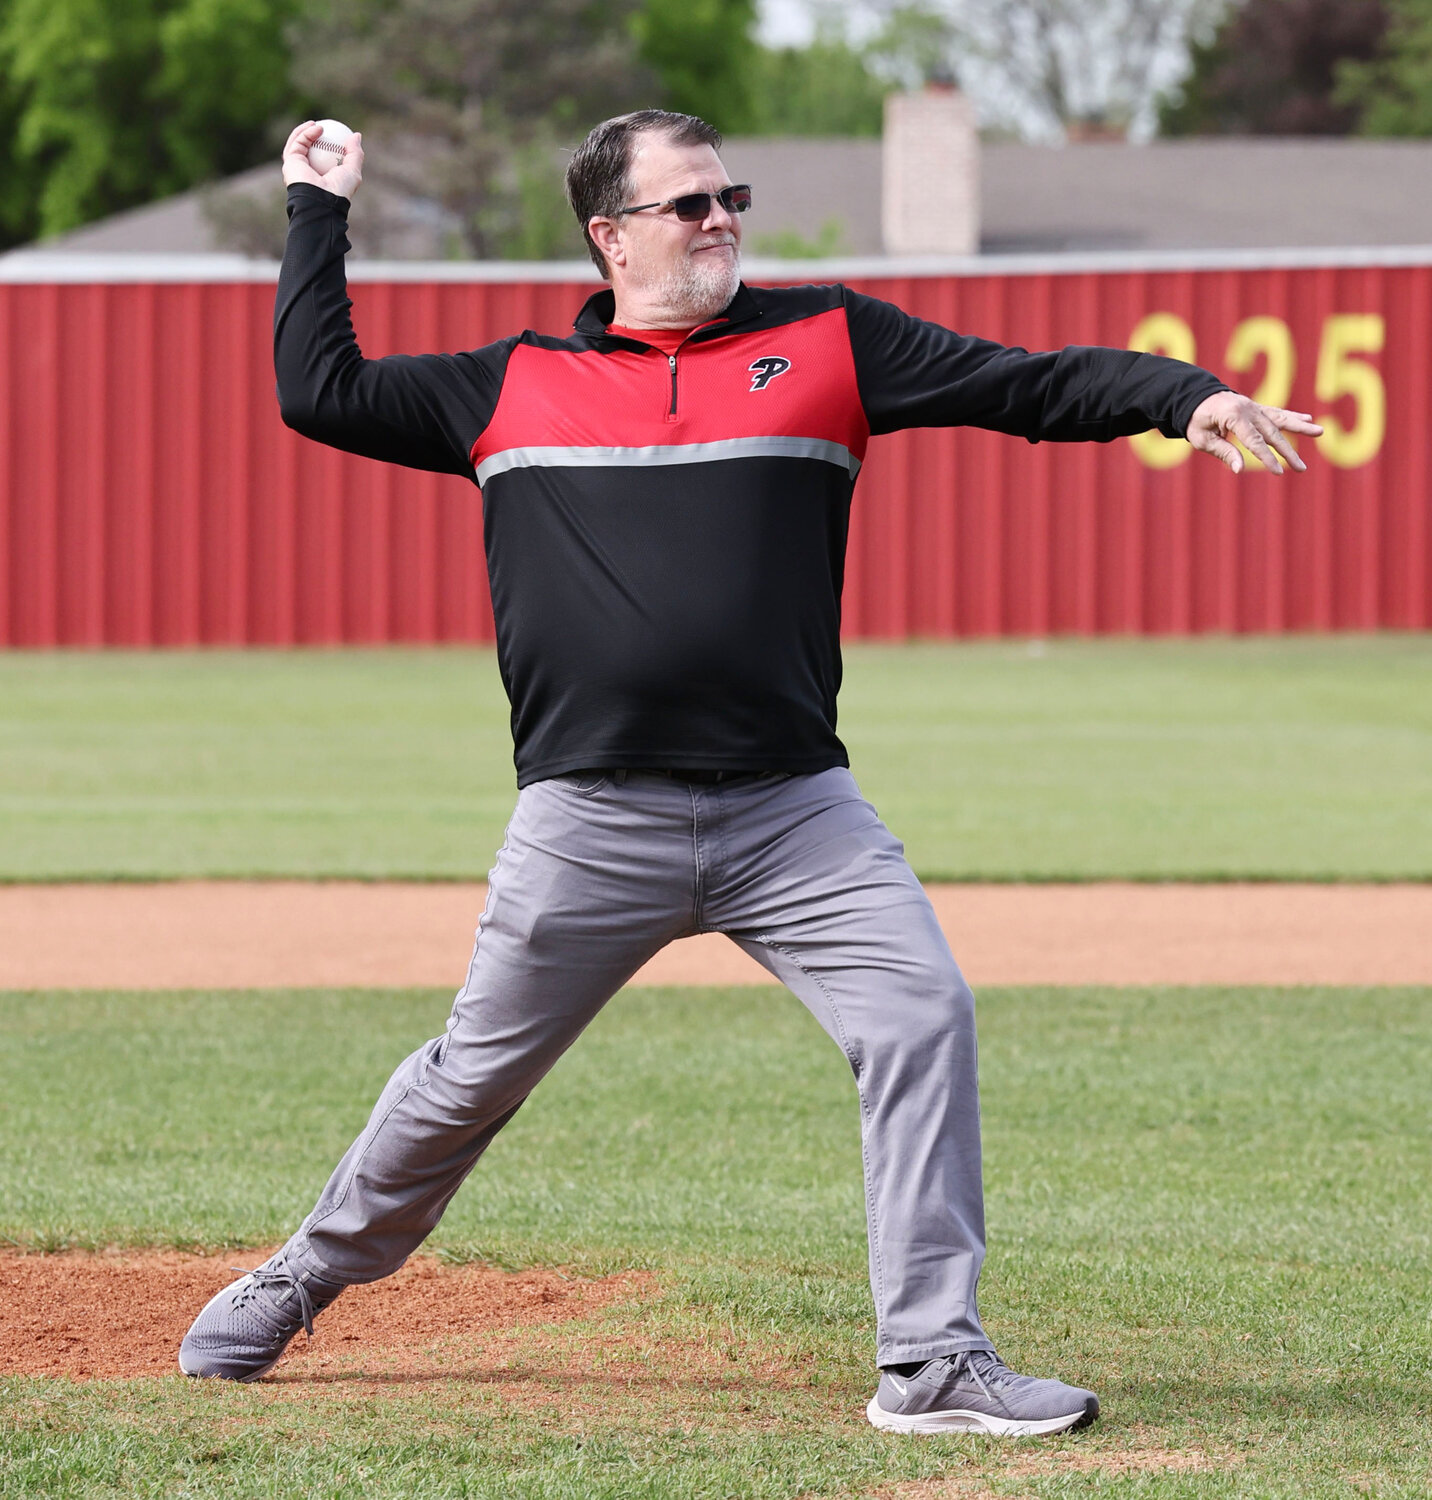 Purcell boys basketball coach Roger Raper threw out the ceremonial first pitch before the Dragons’ game against Ardmore. Purcell won the game 11-5.